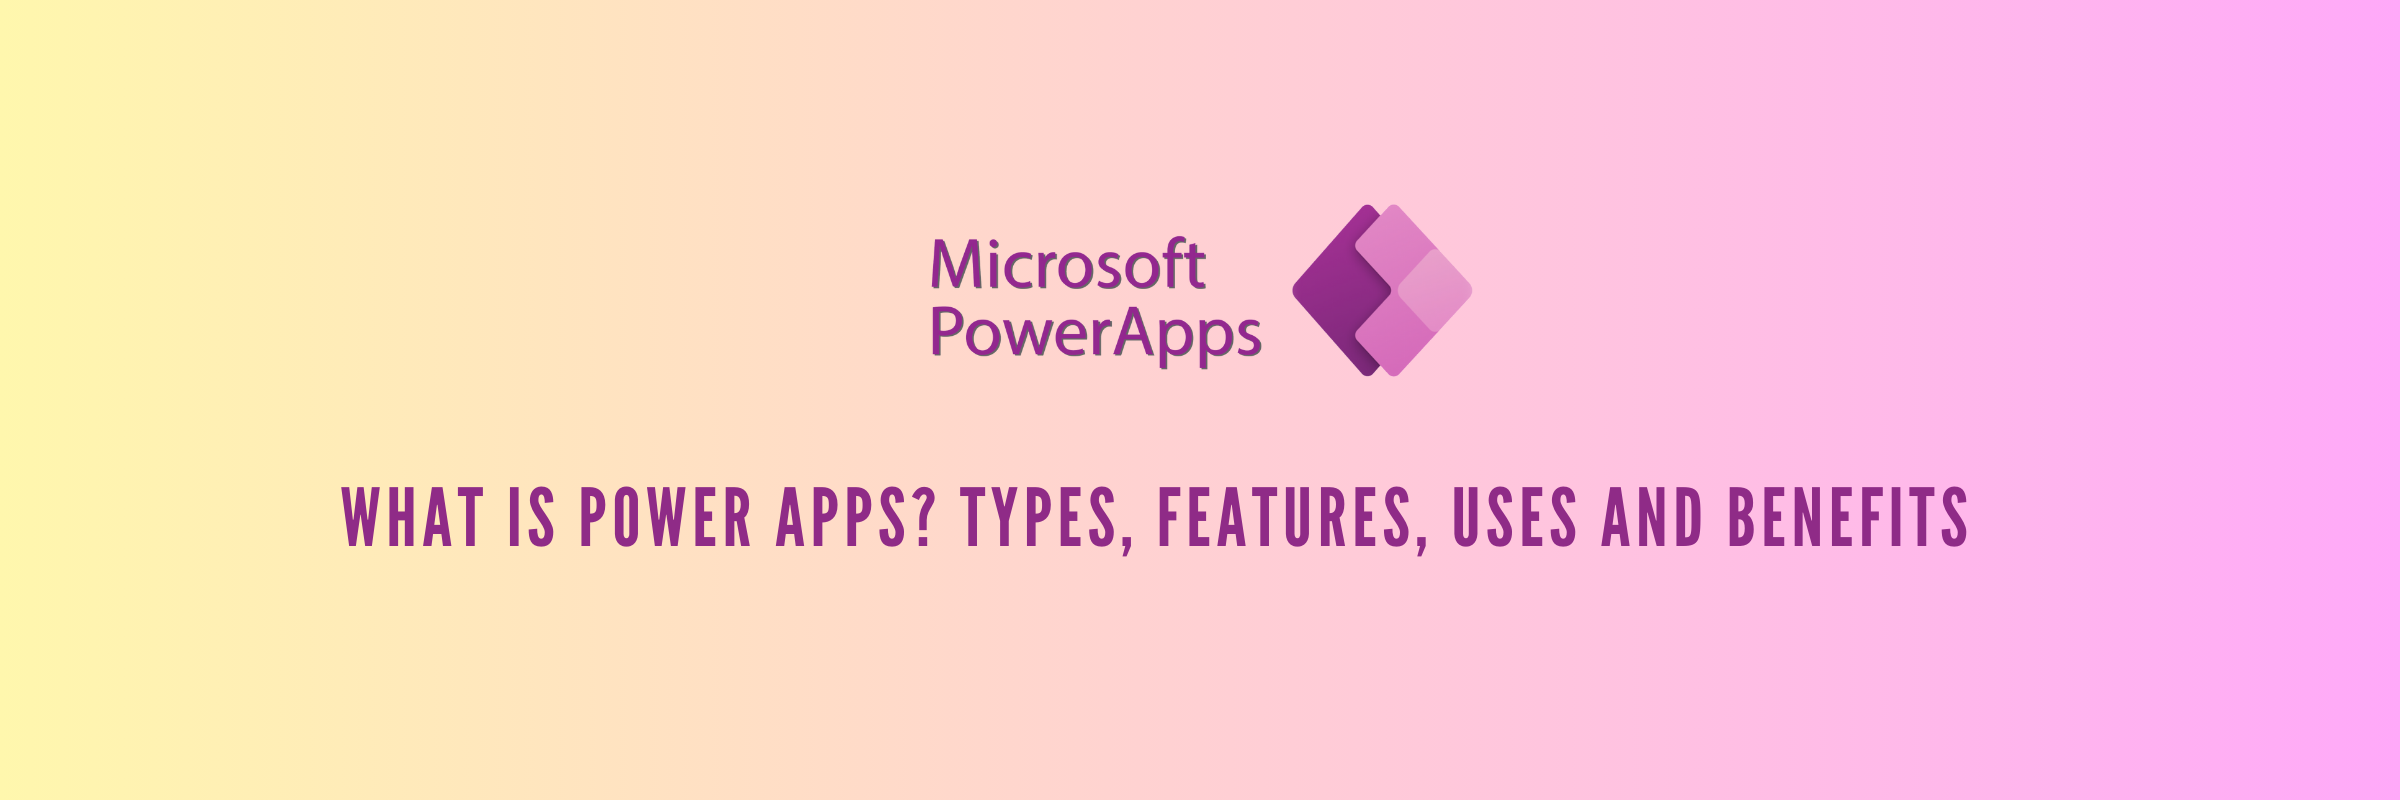 What is Power Apps? Types, Features, Uses and Benefits